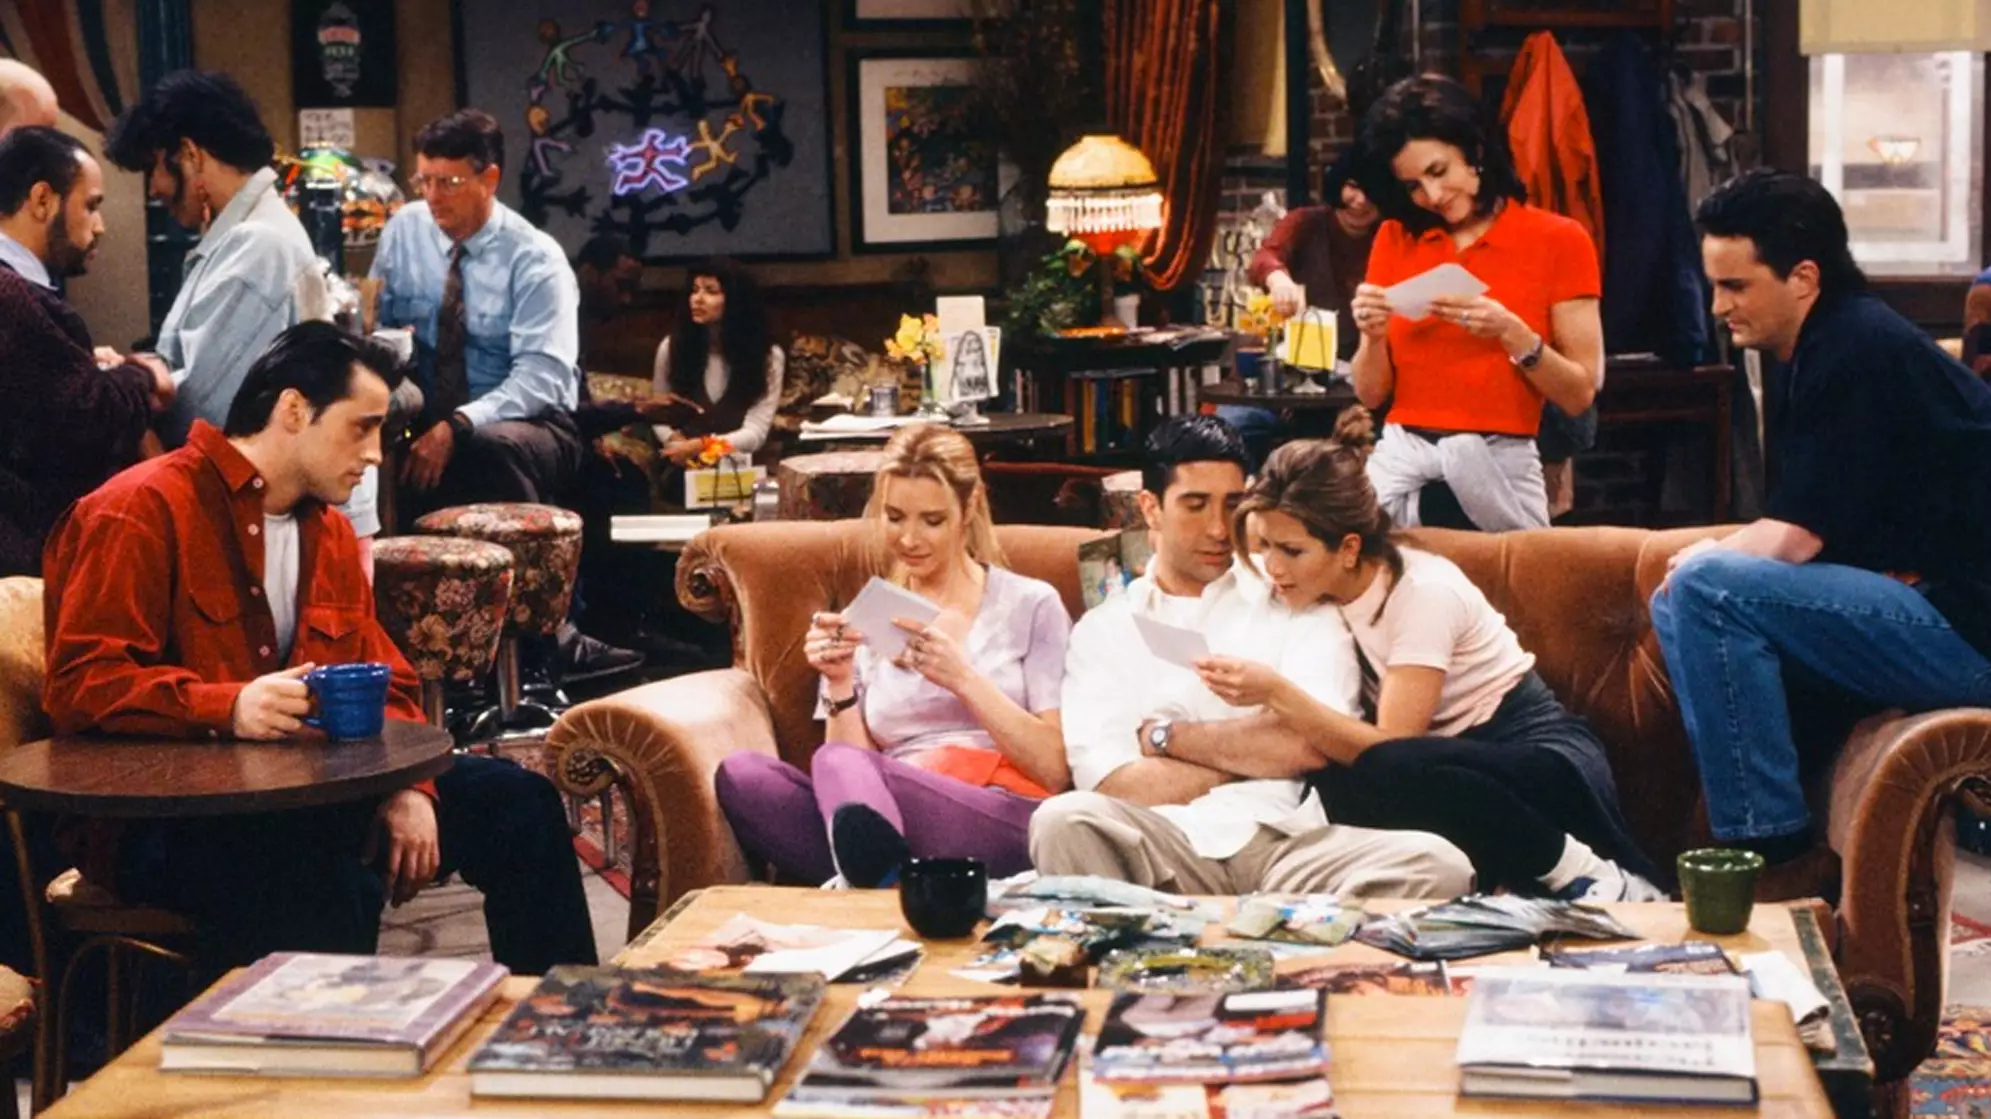 'Friends' Fans Make A Convincing Case For Darwinism By Falling For Yet Another Reunion Hoax